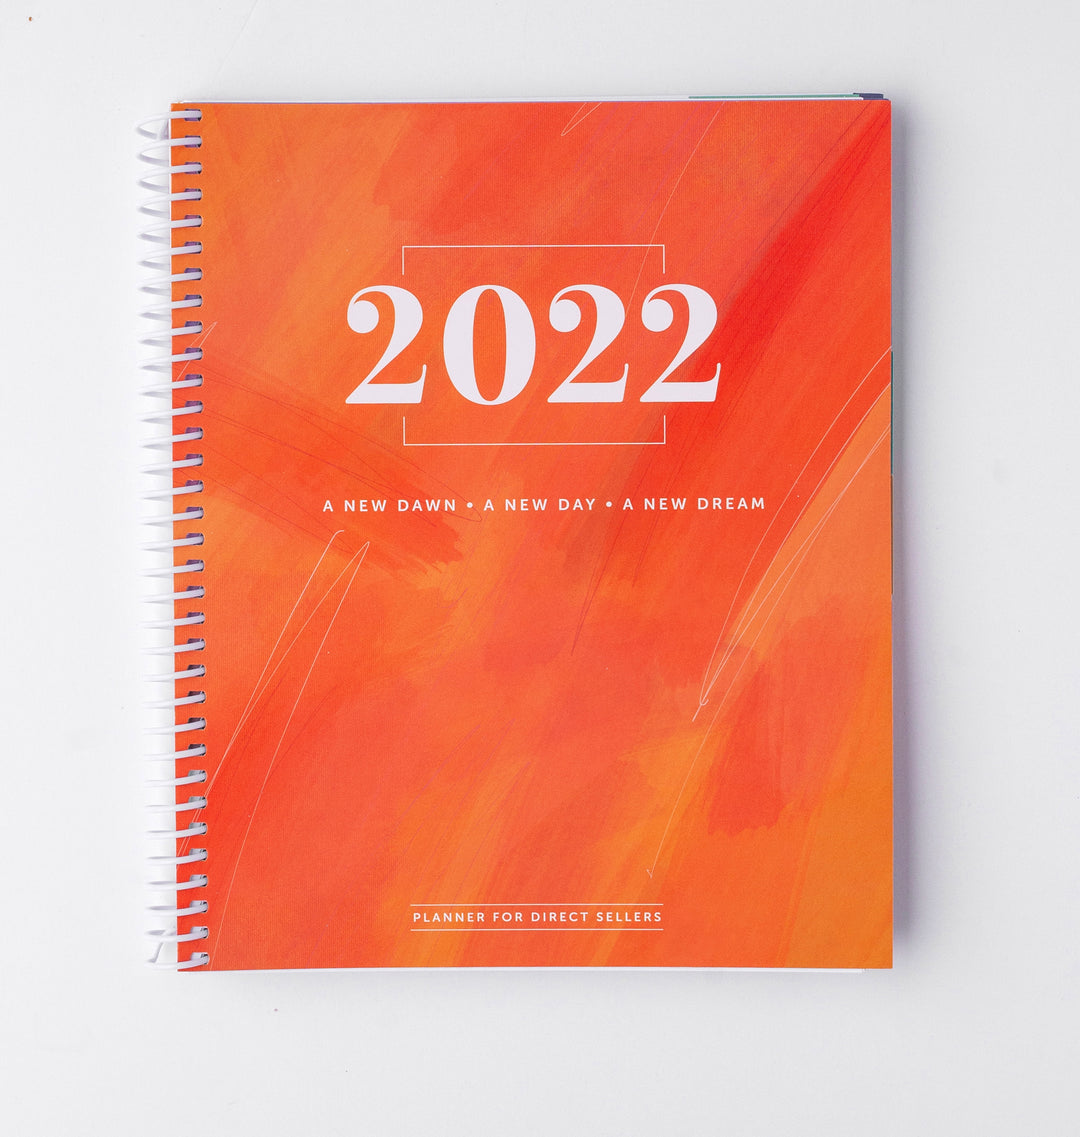 Bulk 2022 Planners 25 or More $462.50 ($18.50 each) NEED PRICING